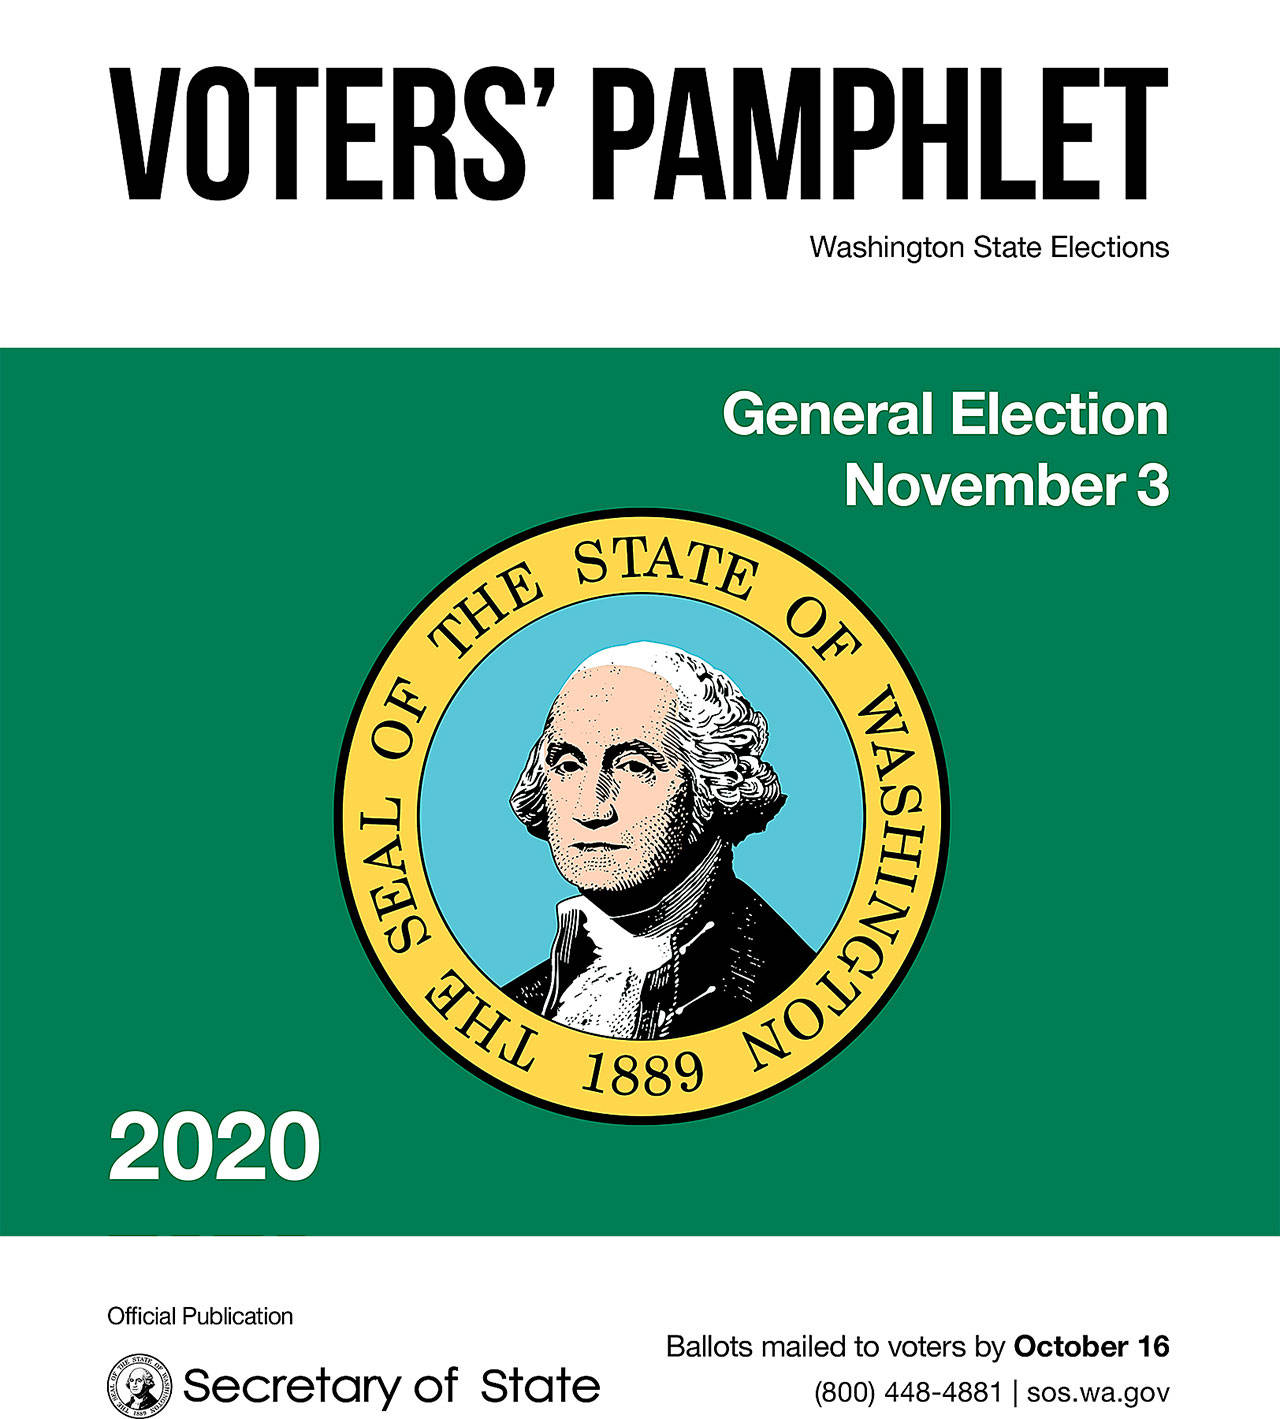 Washington State elections officials could rein in what candidates say about their opponents in voters’ pamphlets. (Washington State Secretary of State)